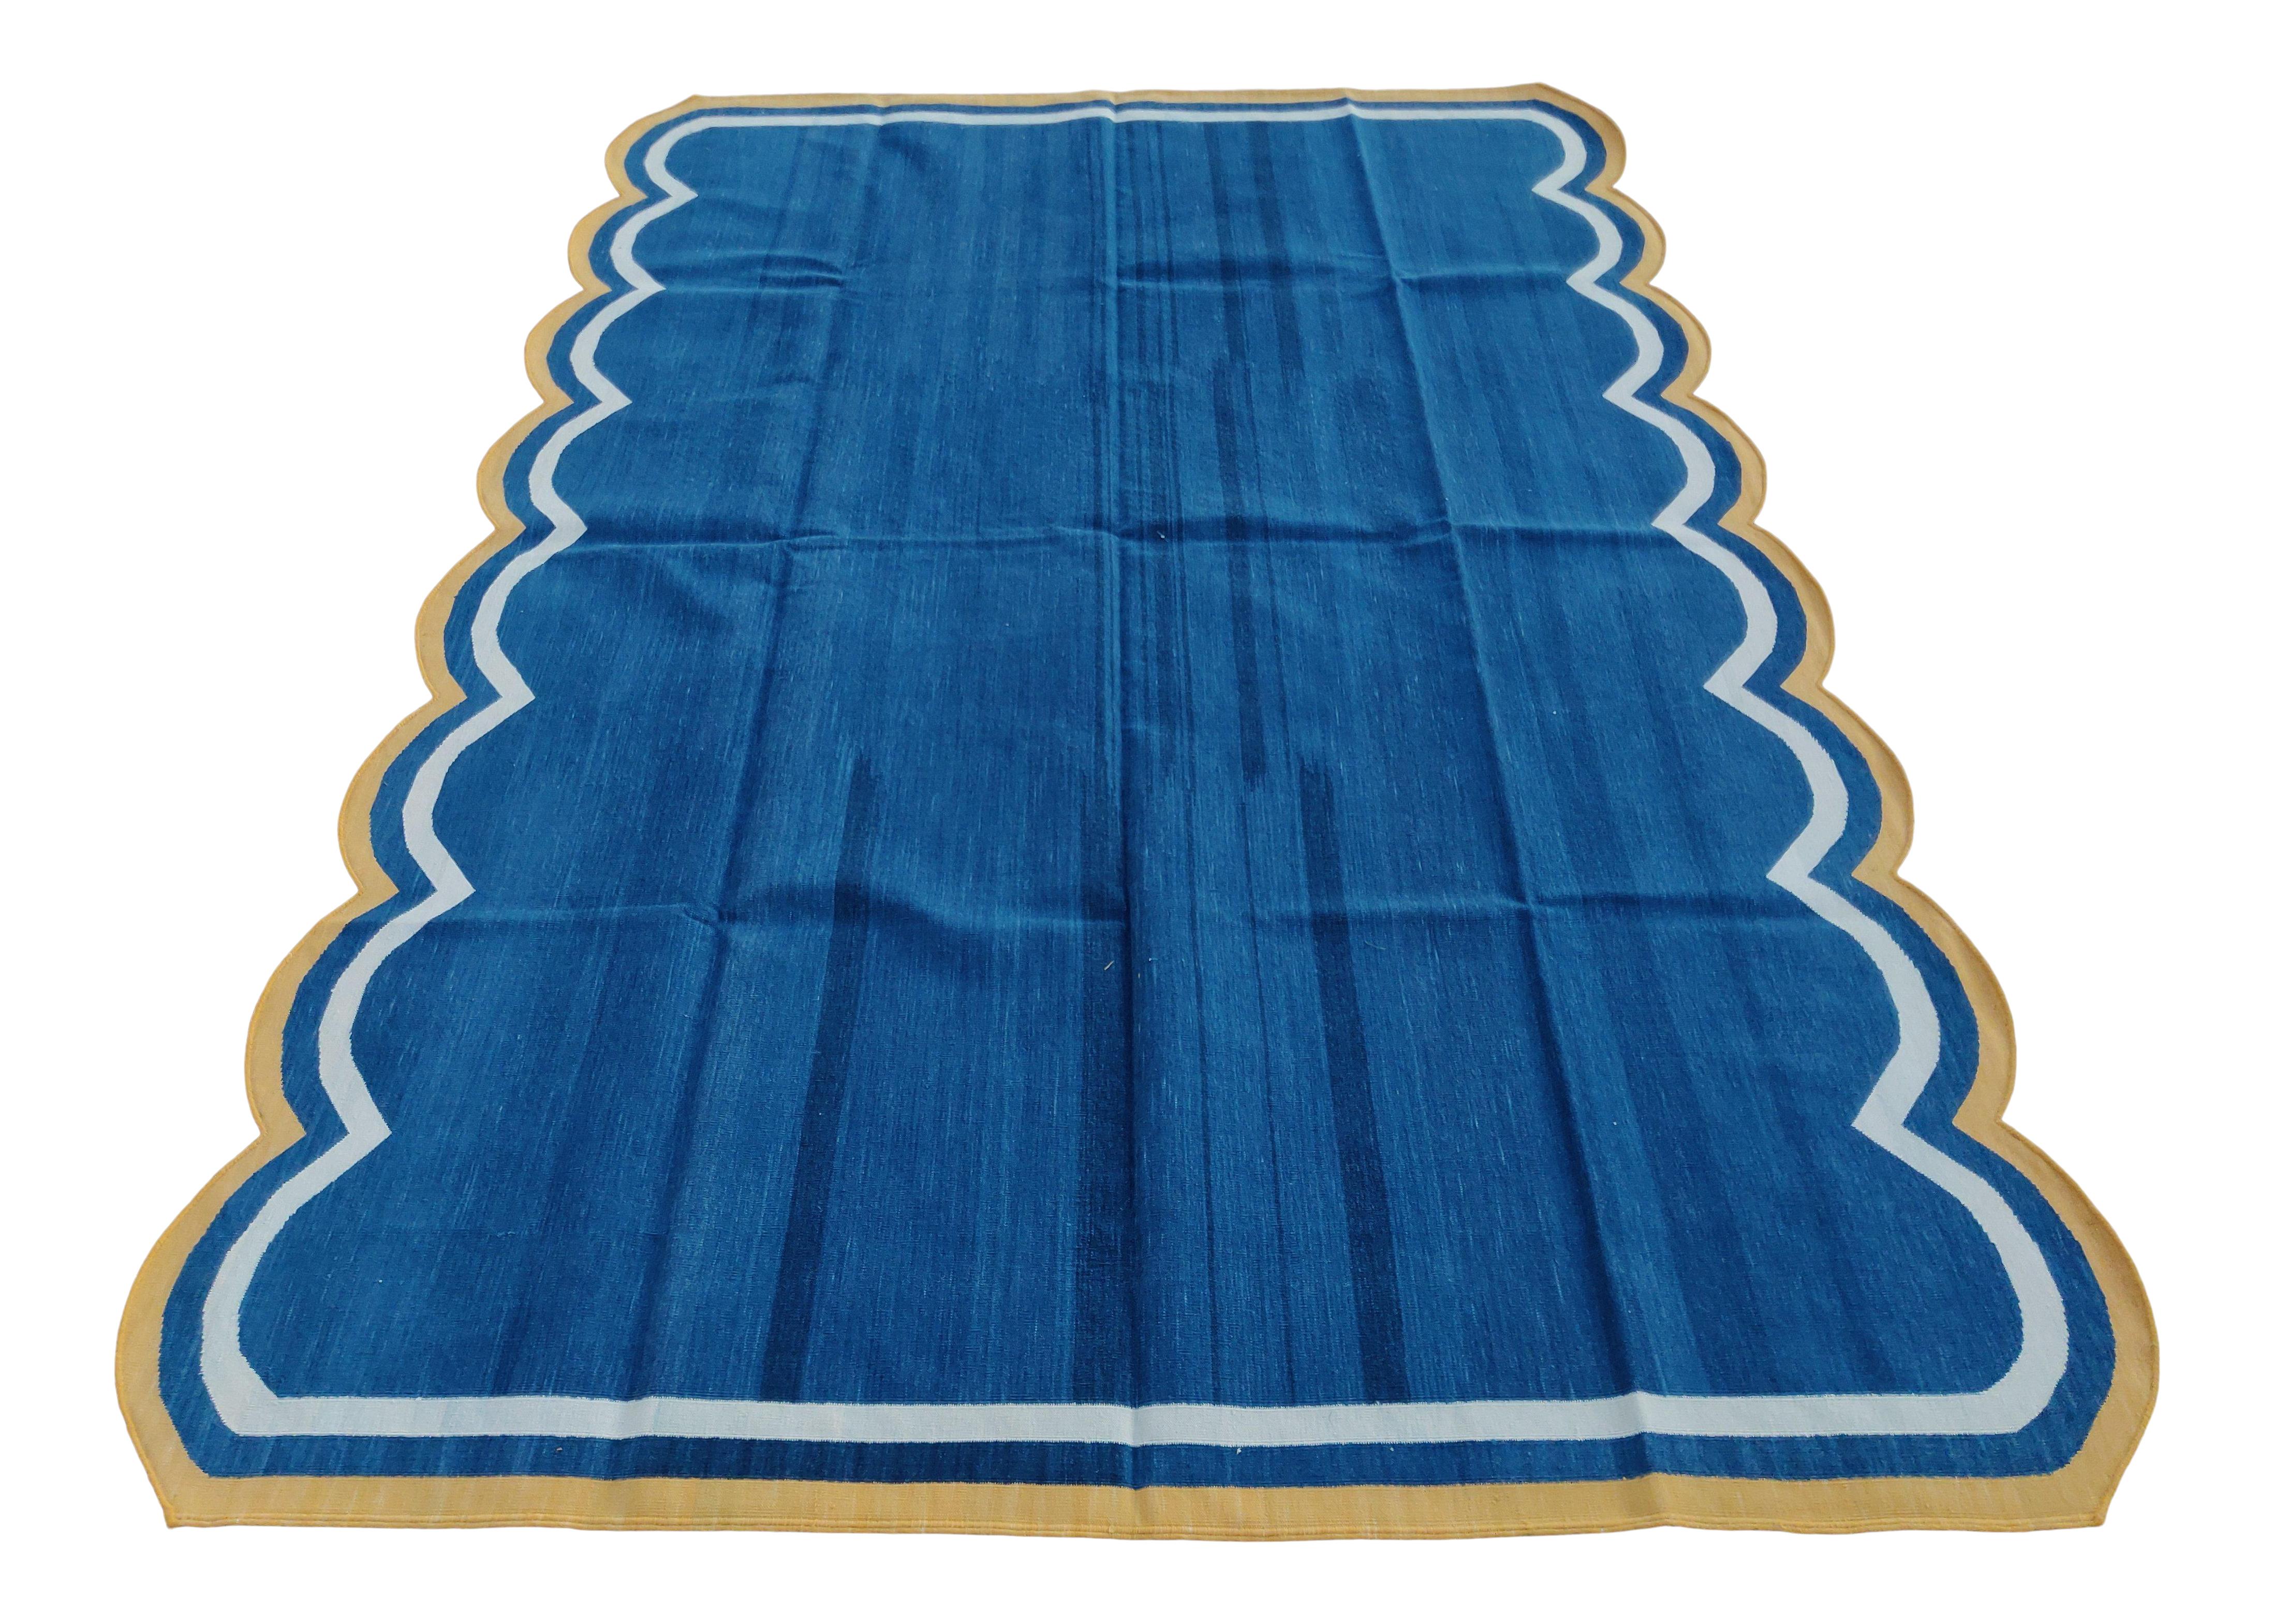 Cotton Vegetable Dyed Indigo Blue, Cream And Yellow Two Sided Scalloped Rug-8'x10' 
(Scallops runs on 10 Feet Sides)
These special flat-weave dhurries are hand-woven with 15 ply 100% cotton yarn. Due to the special manufacturing techniques used to